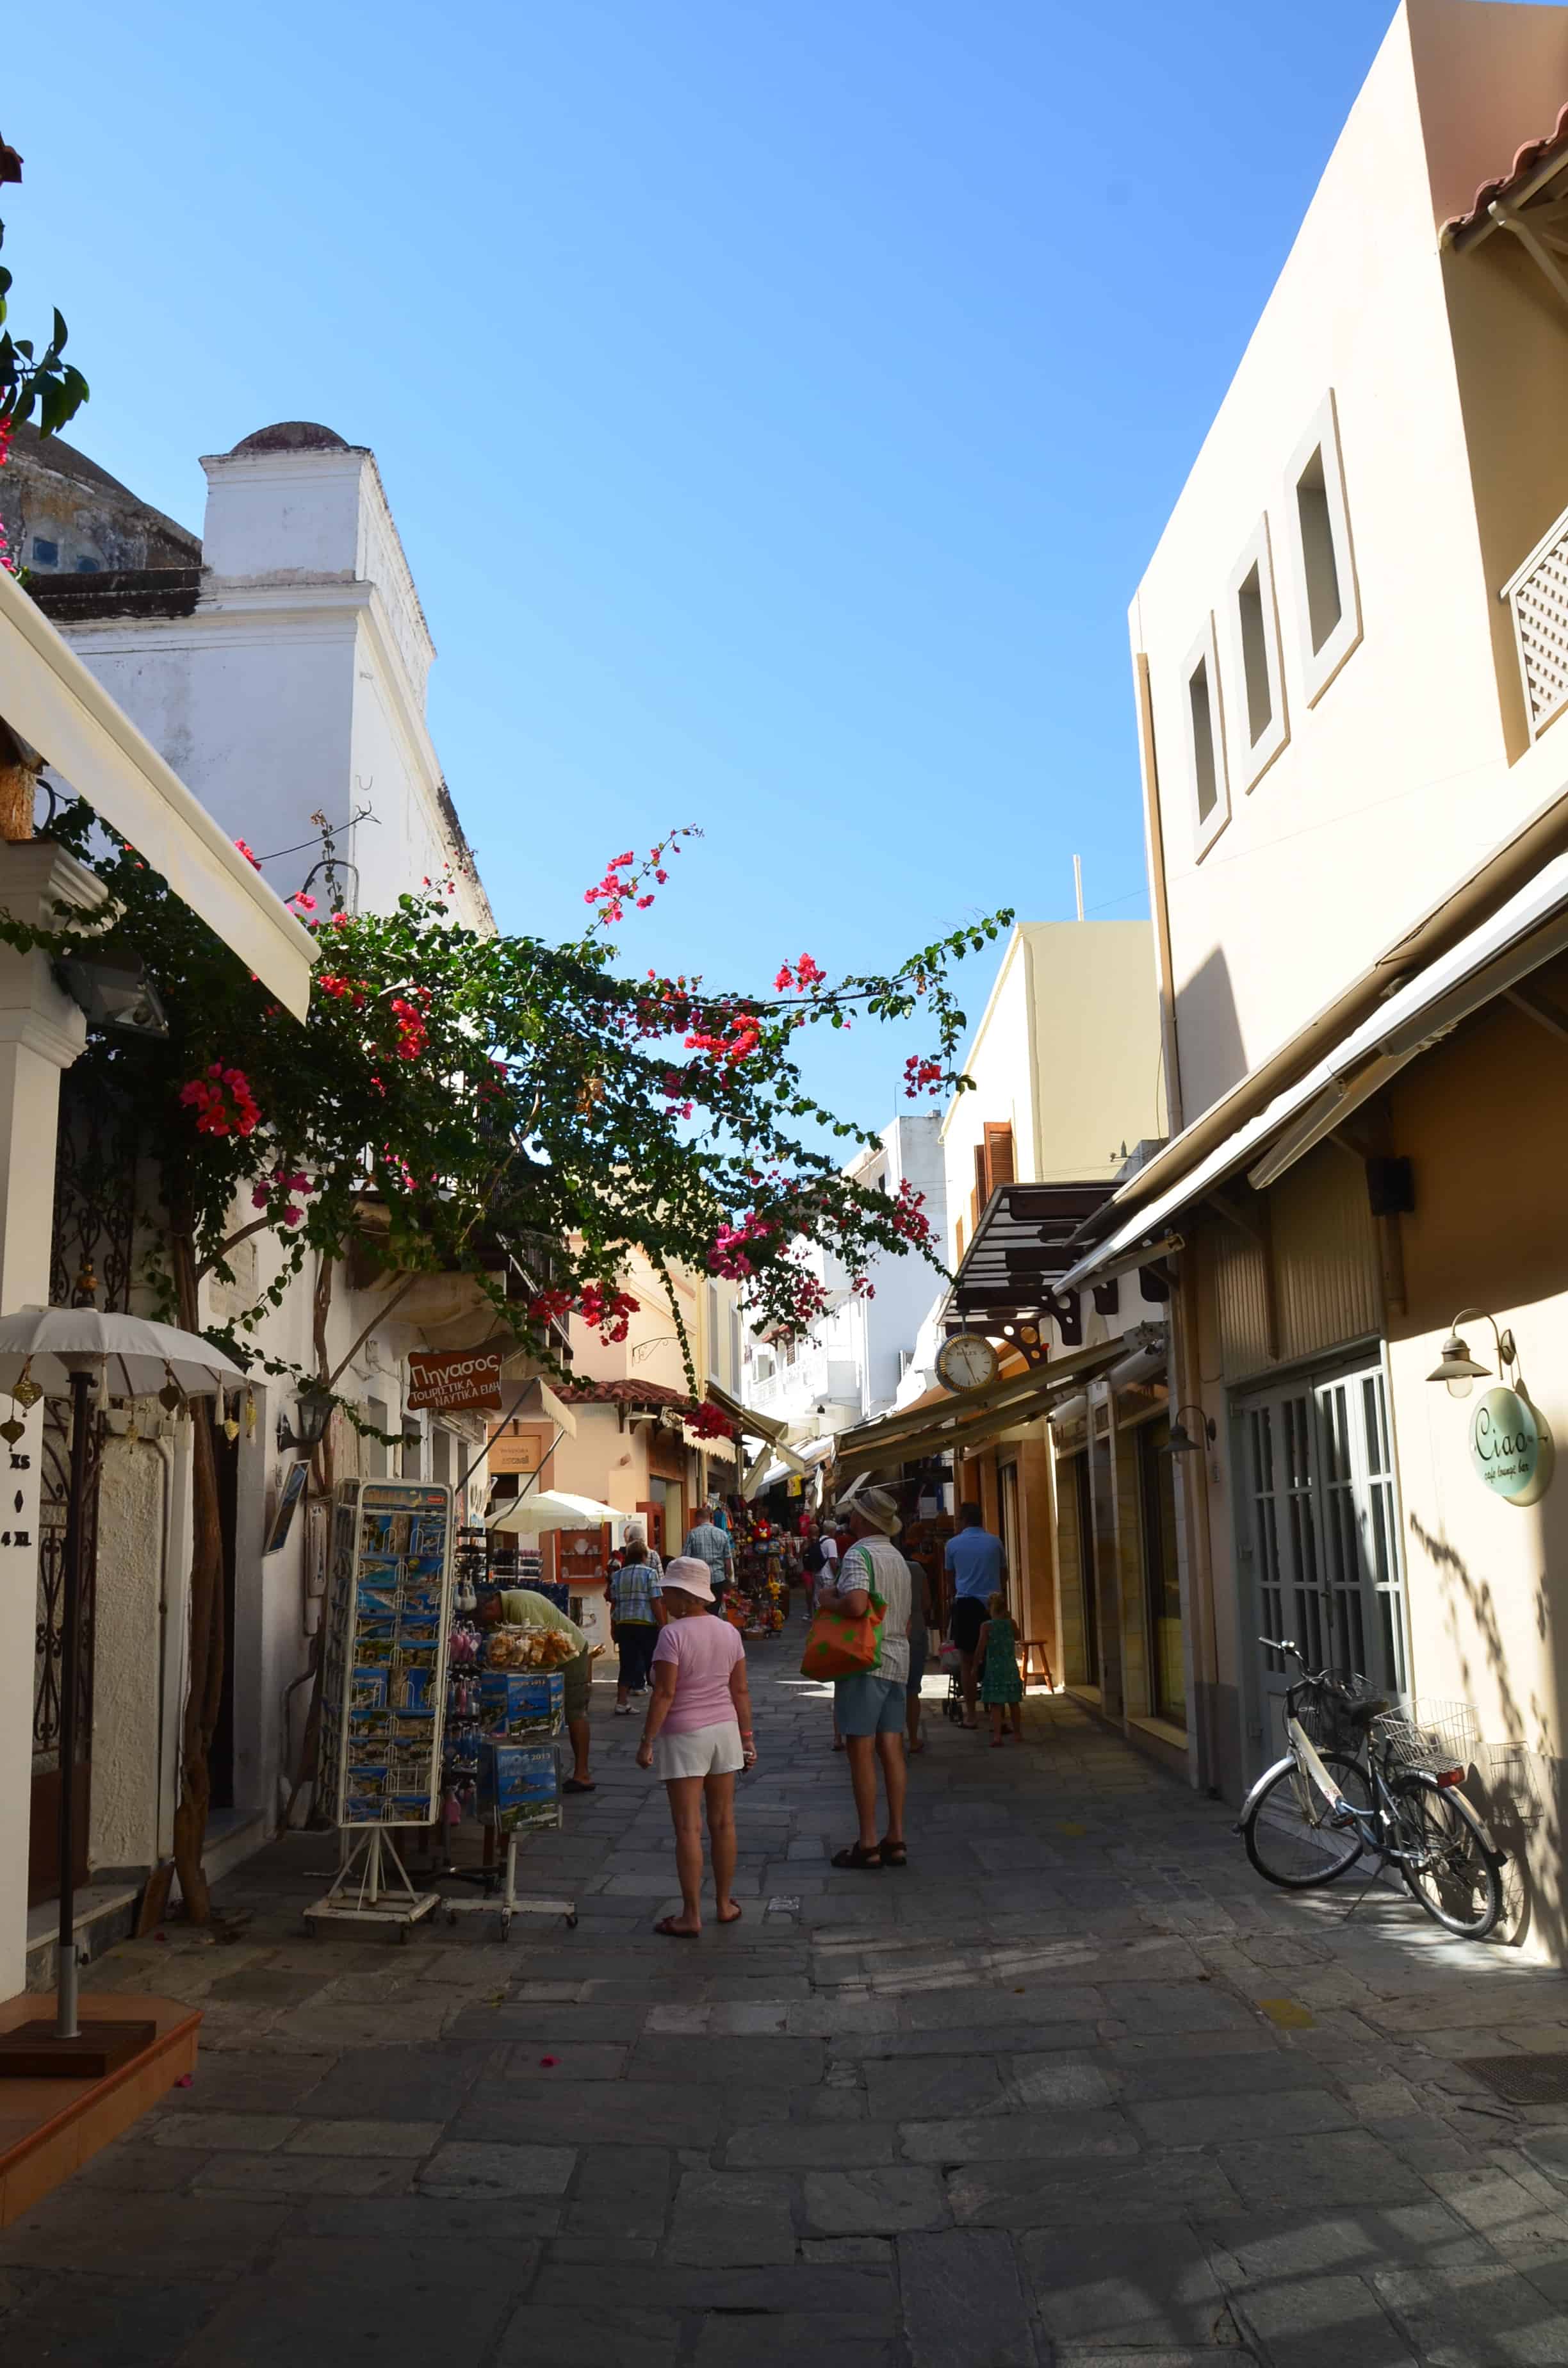 Old town in Kos, Greece